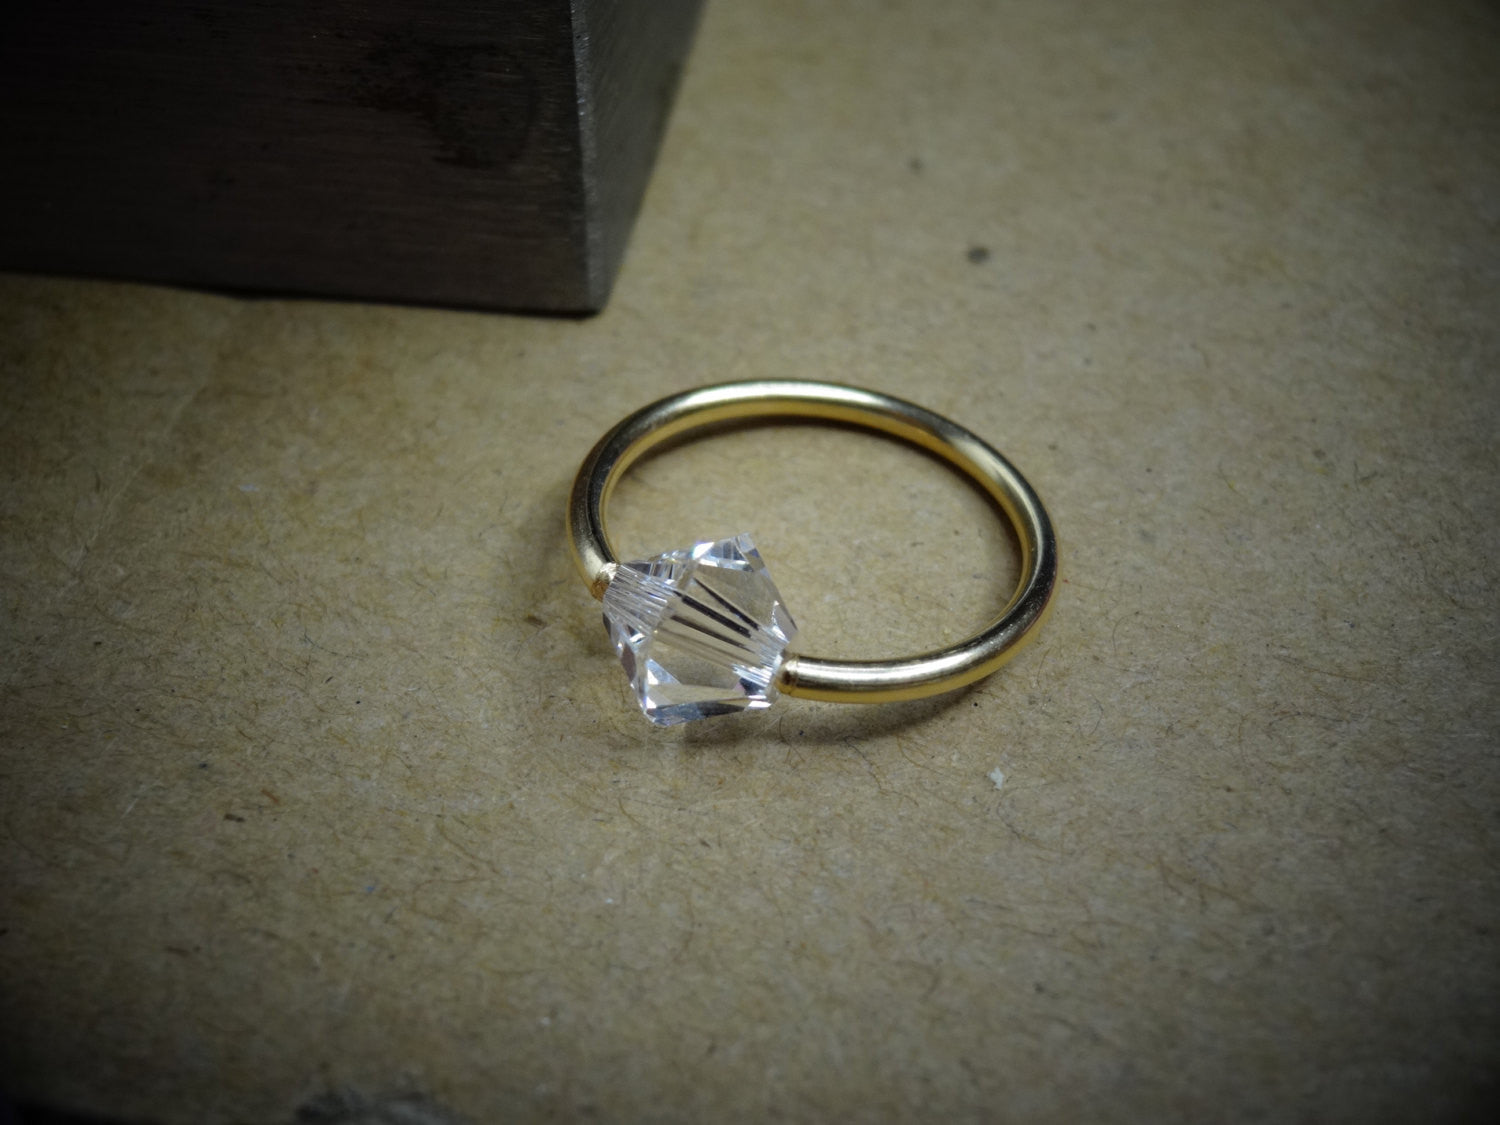 Captive Bead Ring made with 6mm CLEAR Swarovski Crystal - 16 ga Hoop - 14k Gold (Y, W, or R), Sterling Silver, or Platinum